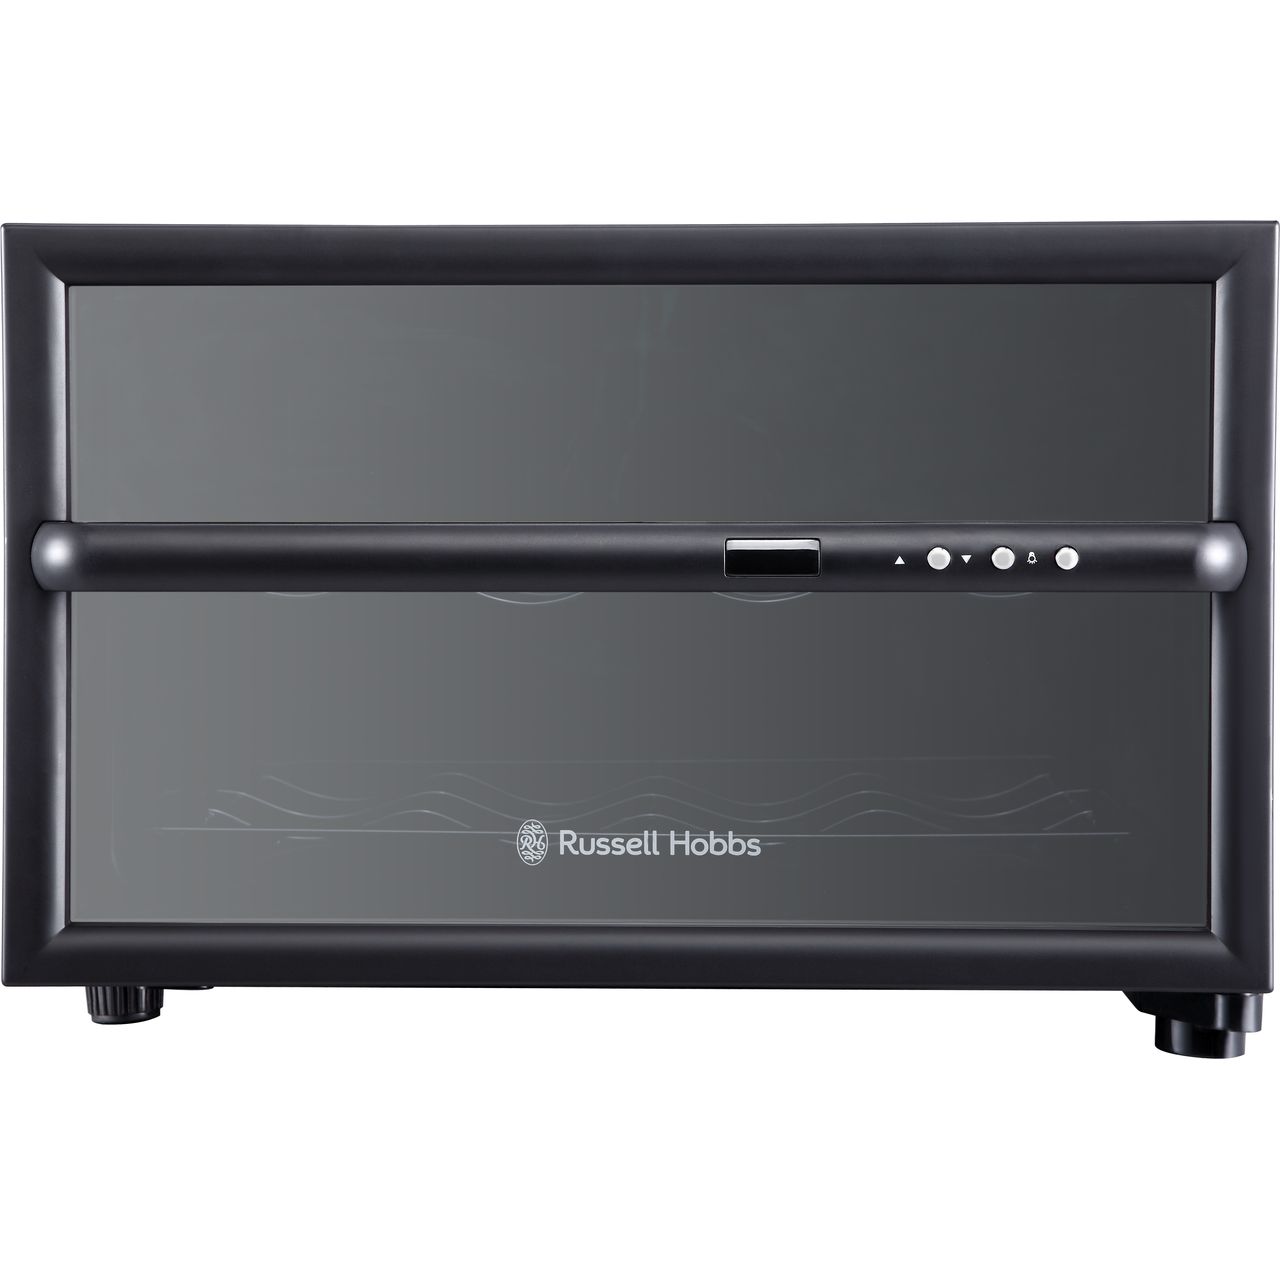 Russell Hobbs RH8WC1 Wine Cooler Review